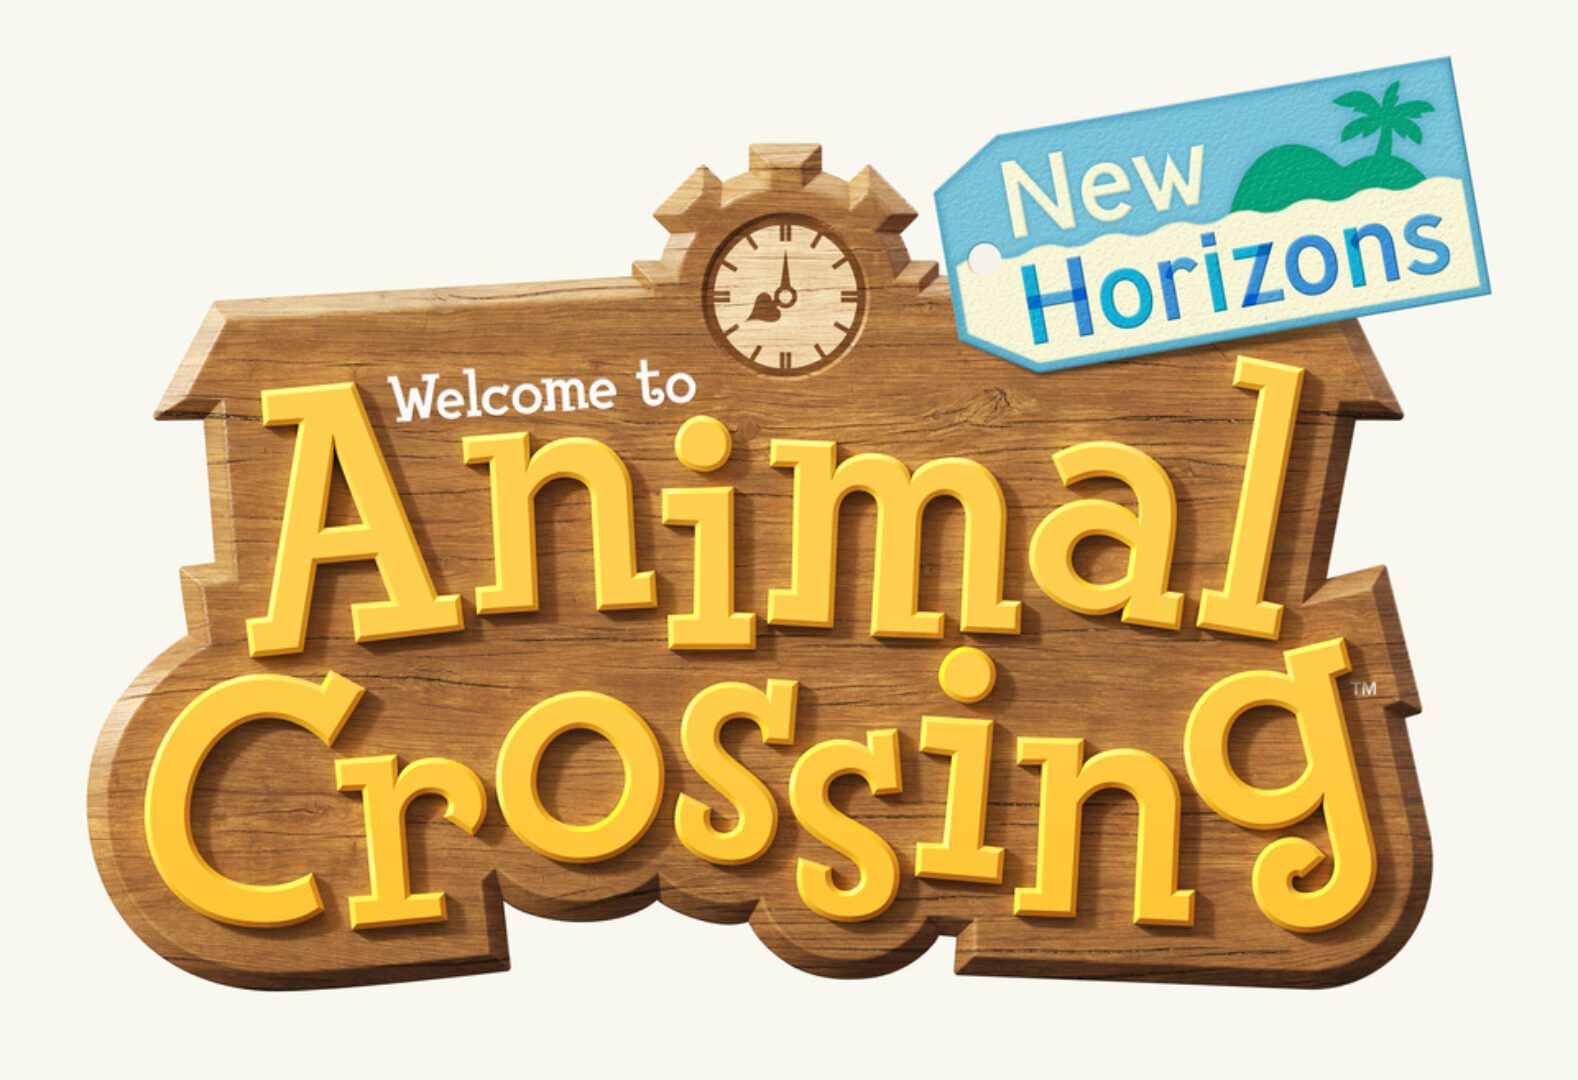 Animal Crossing New Horizons Hands-On Impressions at PAX East 2020